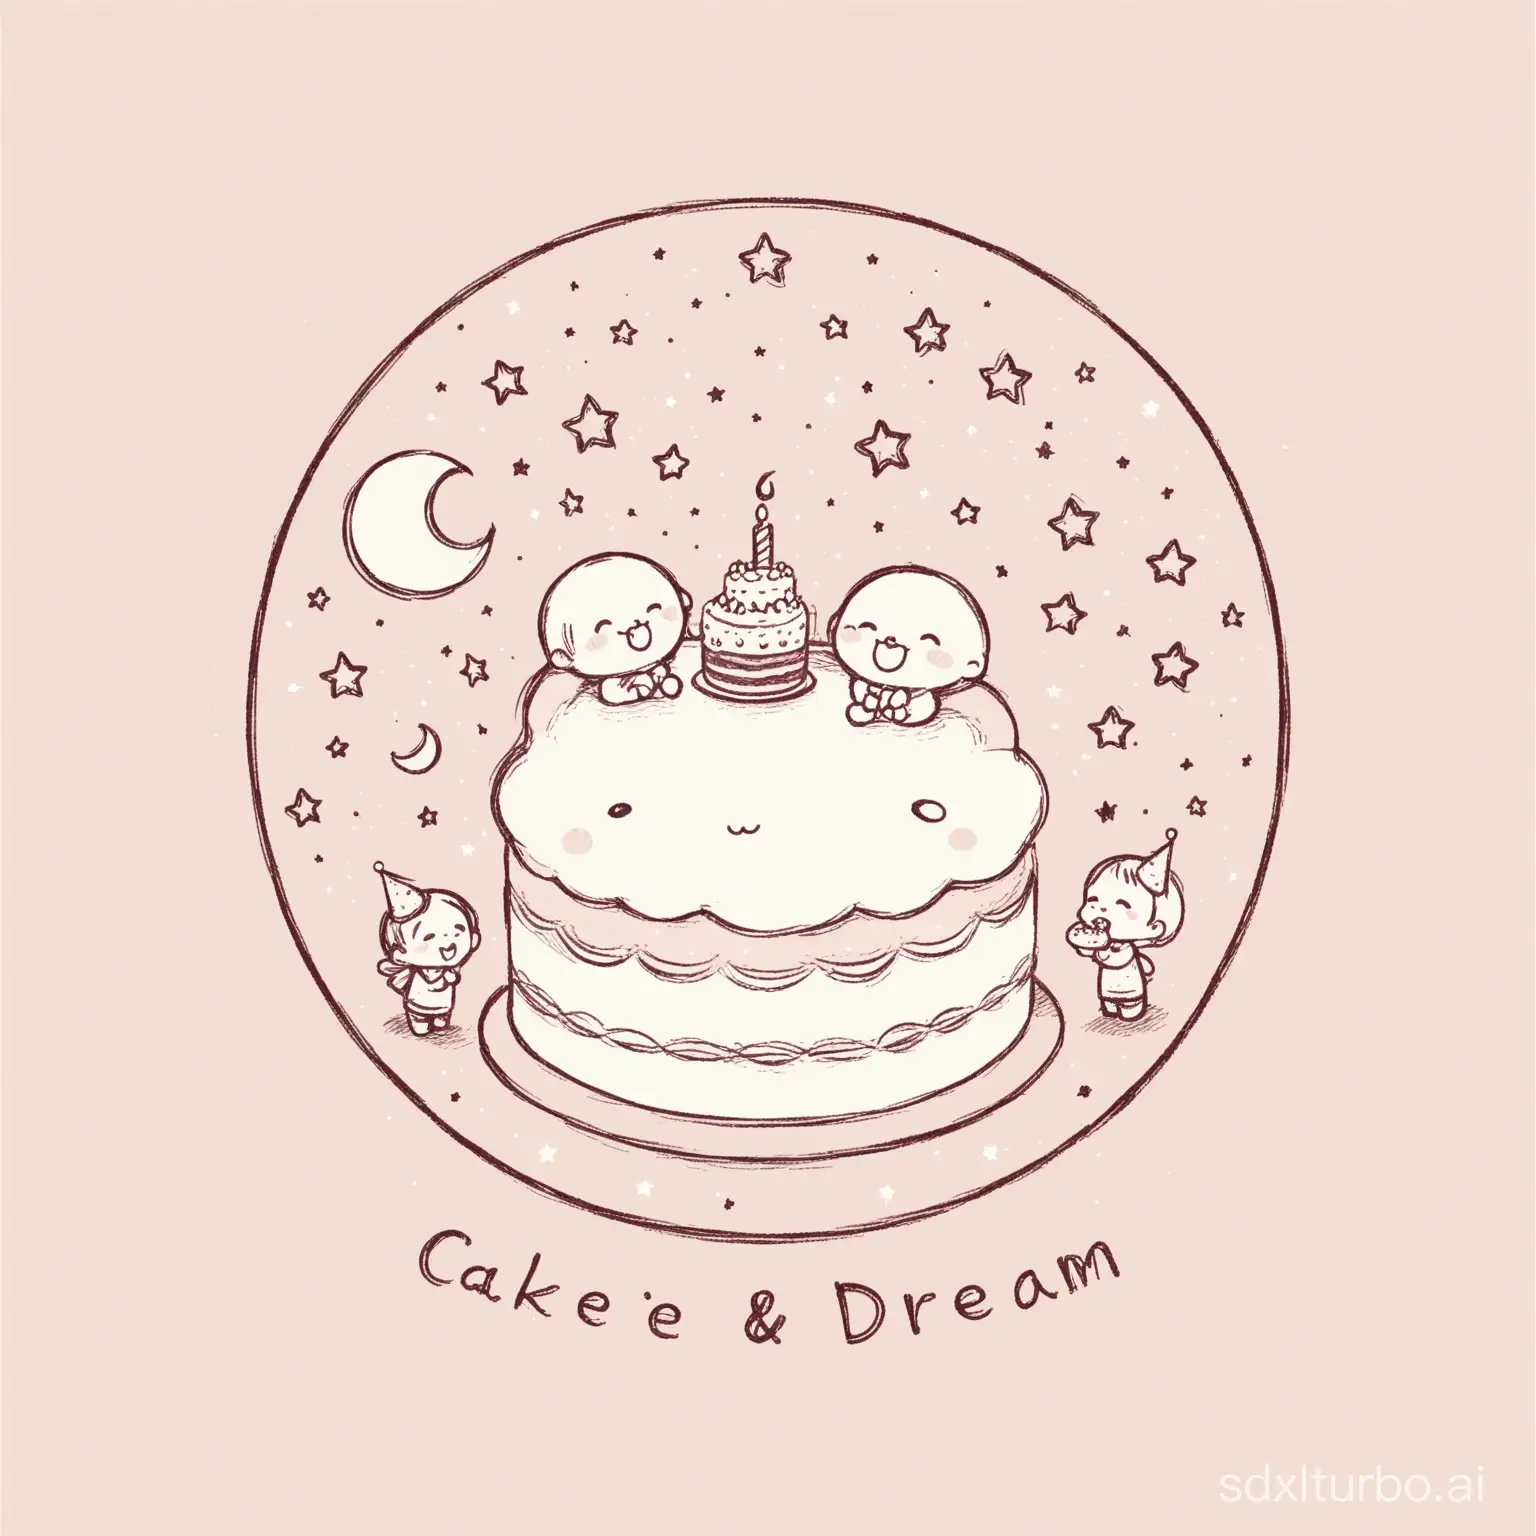 Now it's time to draw a logo for a cake shop. The logo name is tender dream. The requirement is a black-and-white simple sketch, cute, warm, and concise. It needs to have stars and a moon, not too childish, more dreamy, preferably without a cake. Add text and two little figures making wishes.